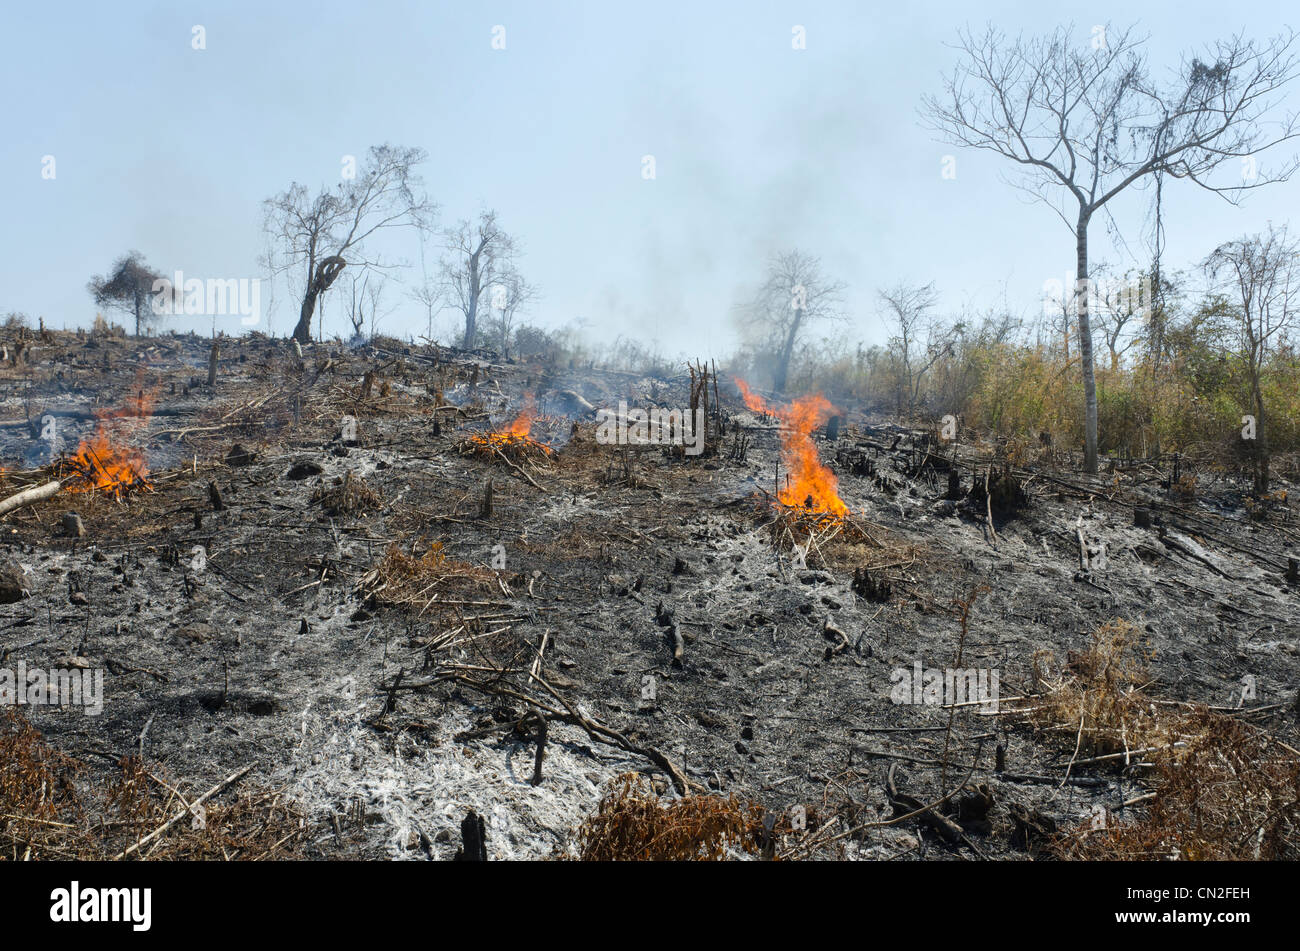 Man slashing vegetation on a burnt hill side after deforestation. Road from Pathein to Mawdin Sun. Irrawaddy delta. Myanmar. Stock Photo